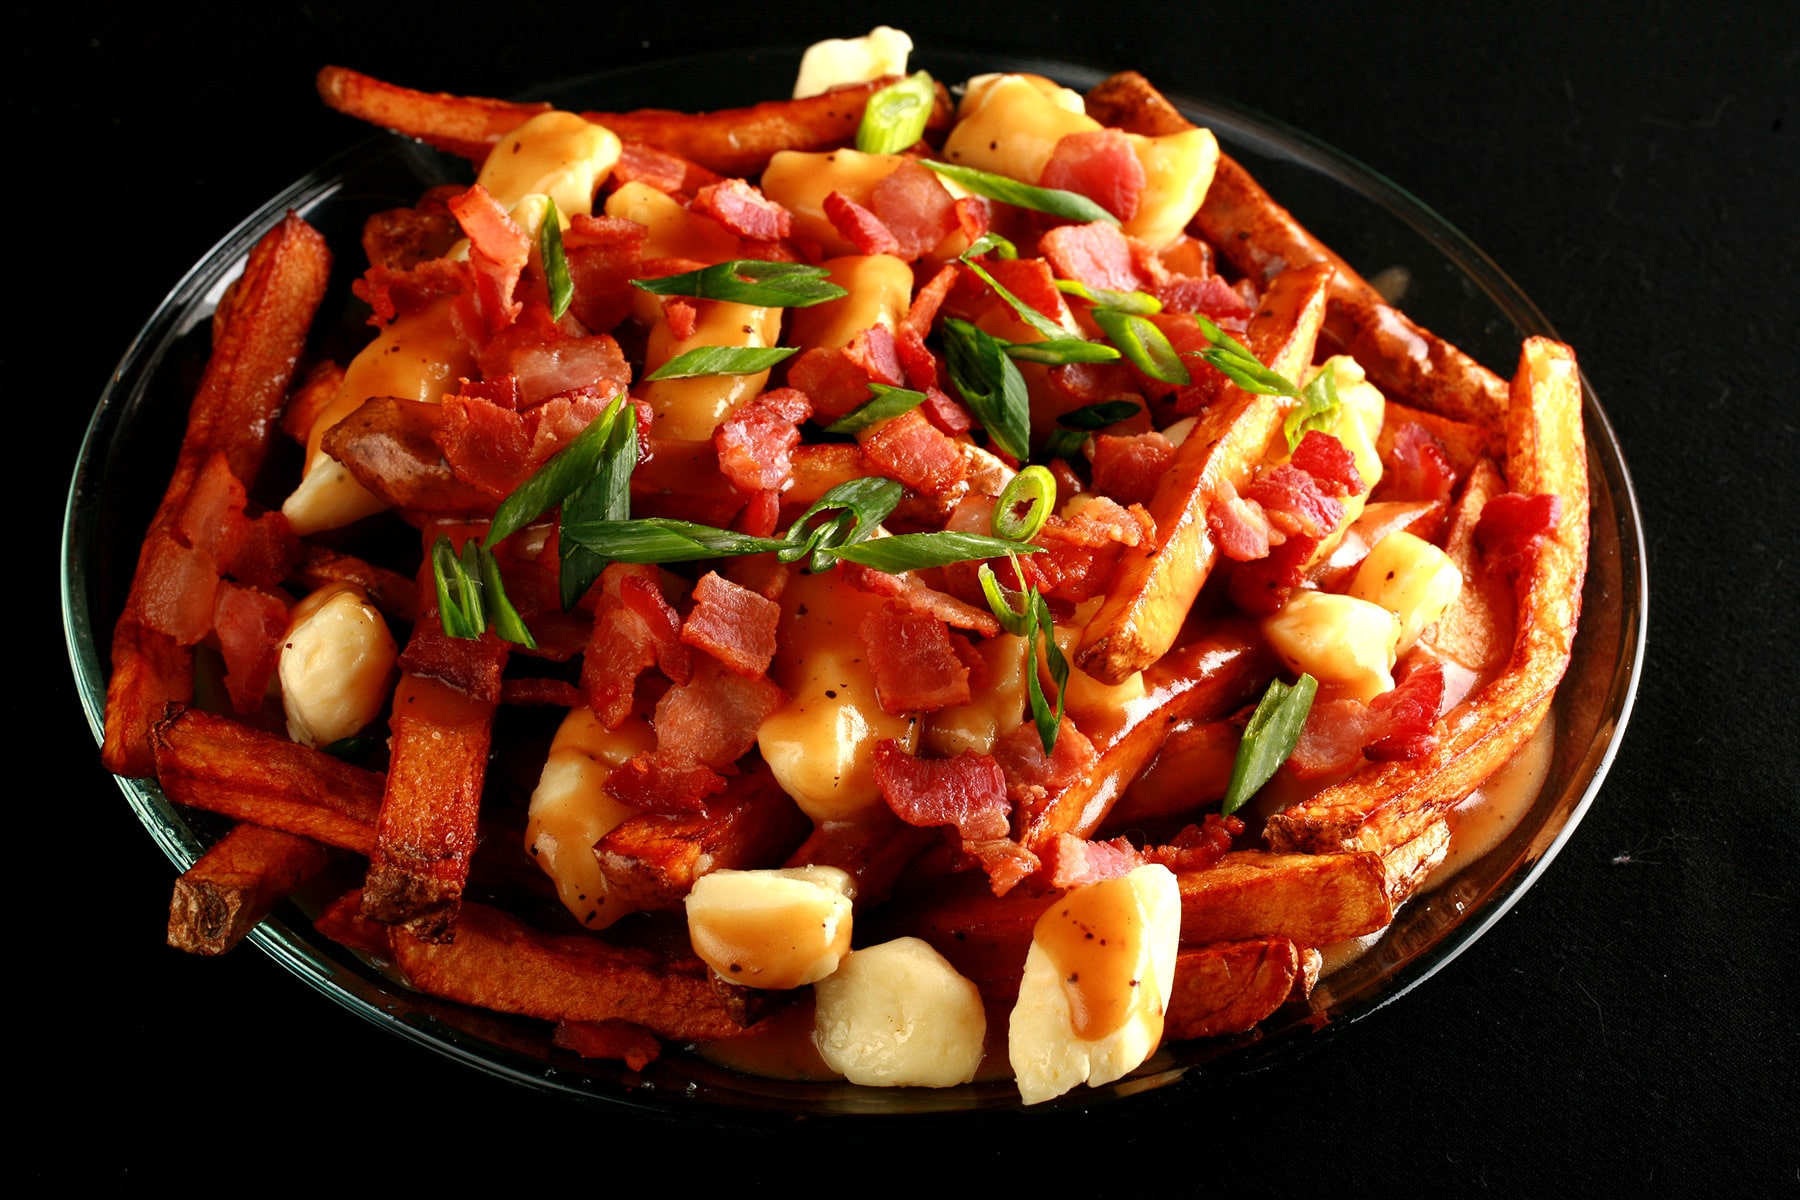 A close up photo of a plate of poutine, garnished with bacon and green onions..